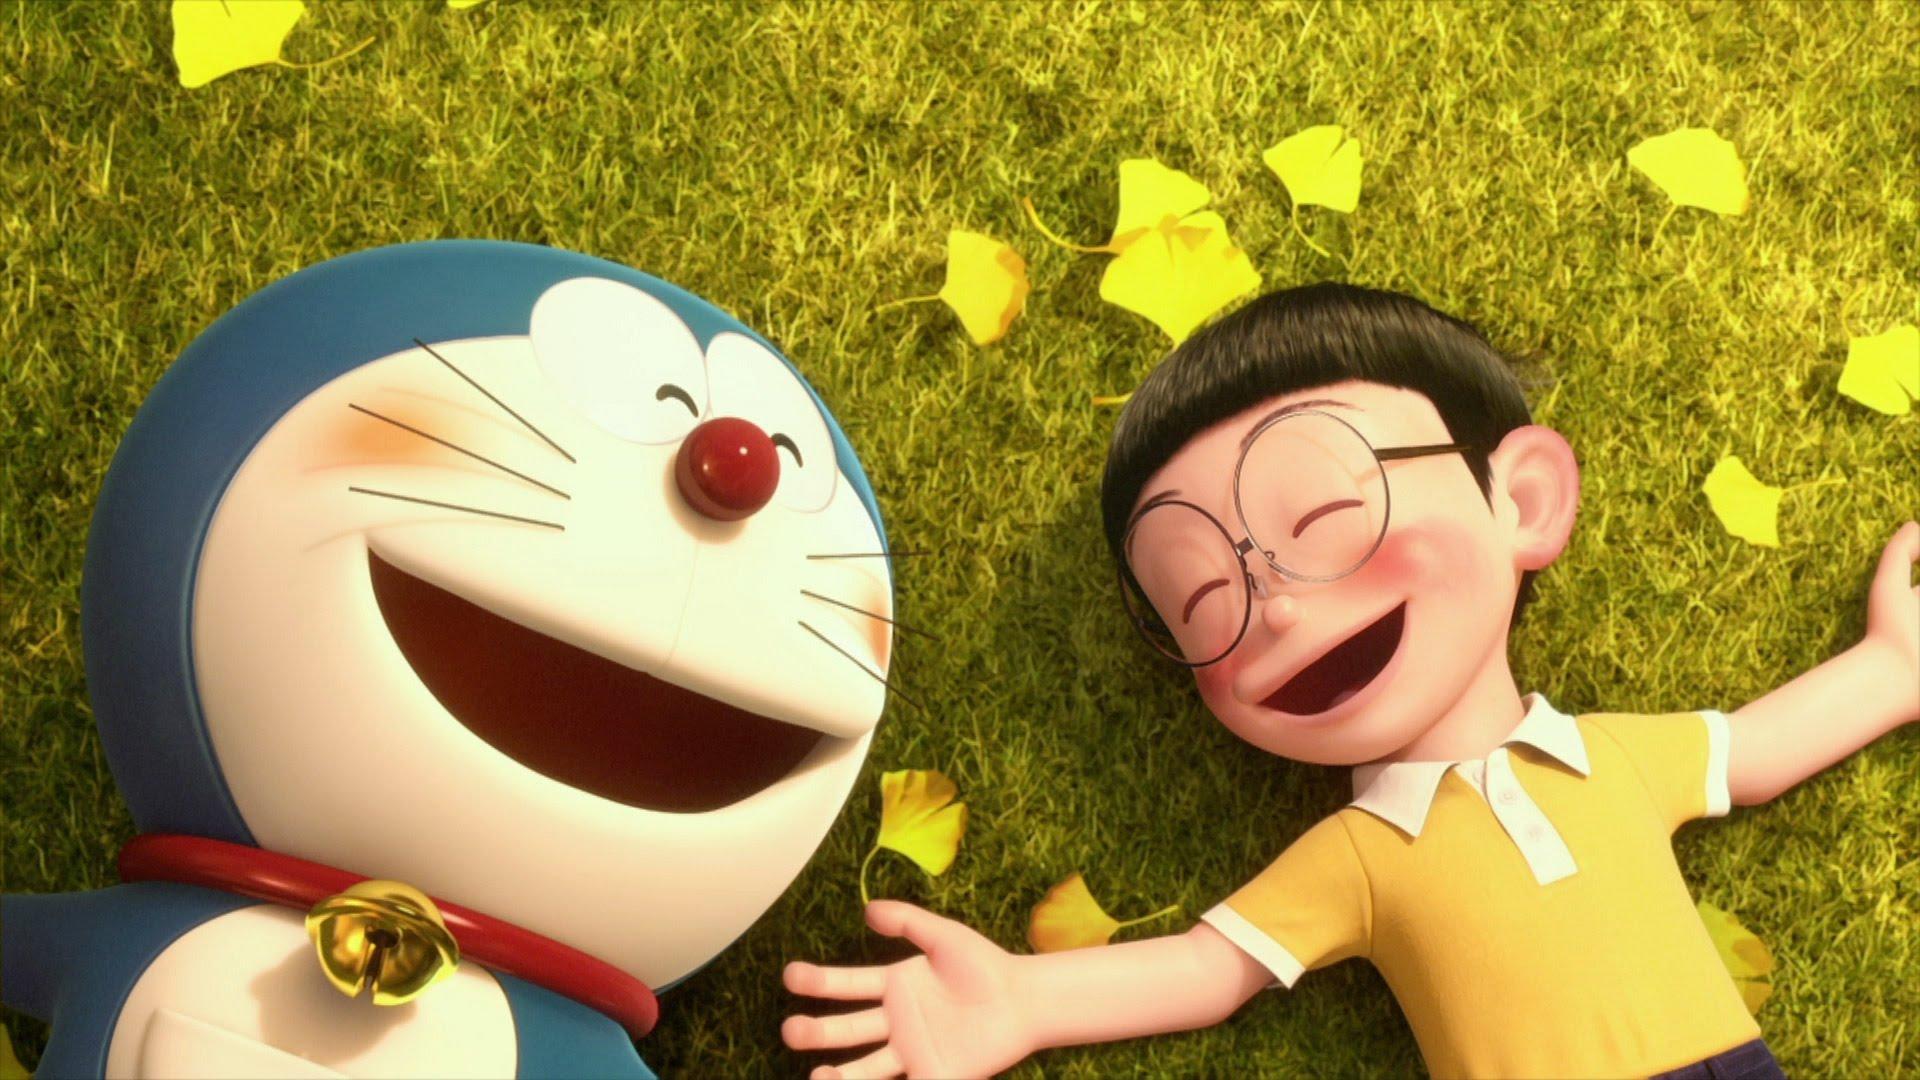 Stand by Me Doraemon' Review: Japan's Robot Cat Gets CG Upgrade